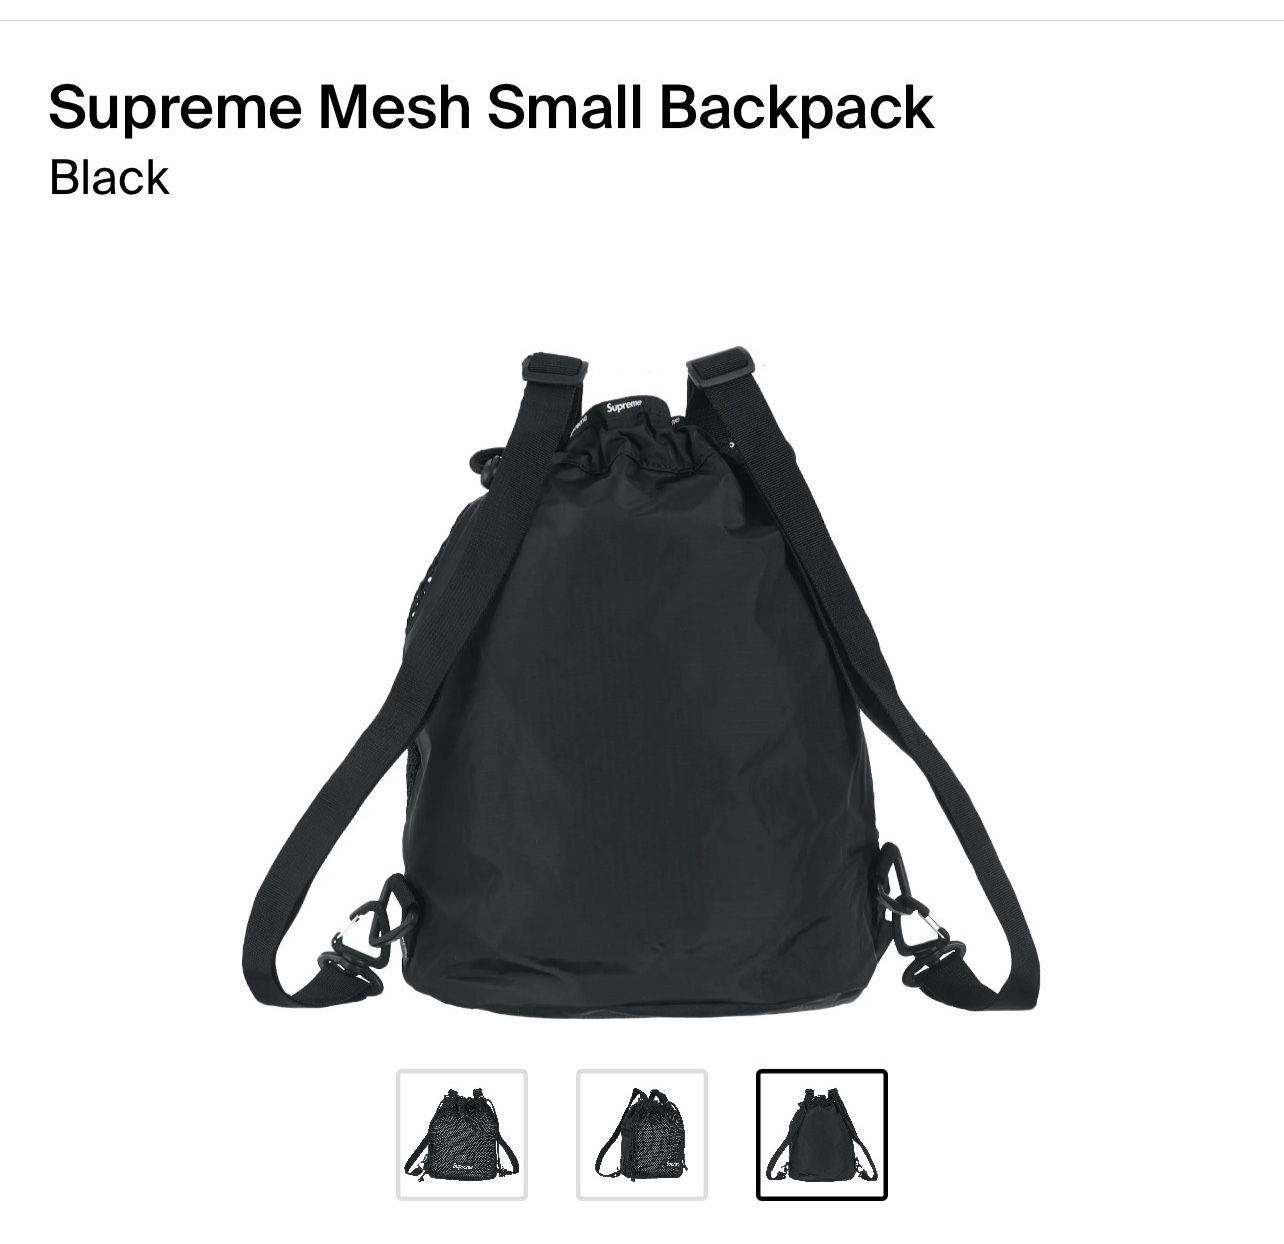 Supreme Mesh Small Backpack for Sale in Alhambra, CA - OfferUp